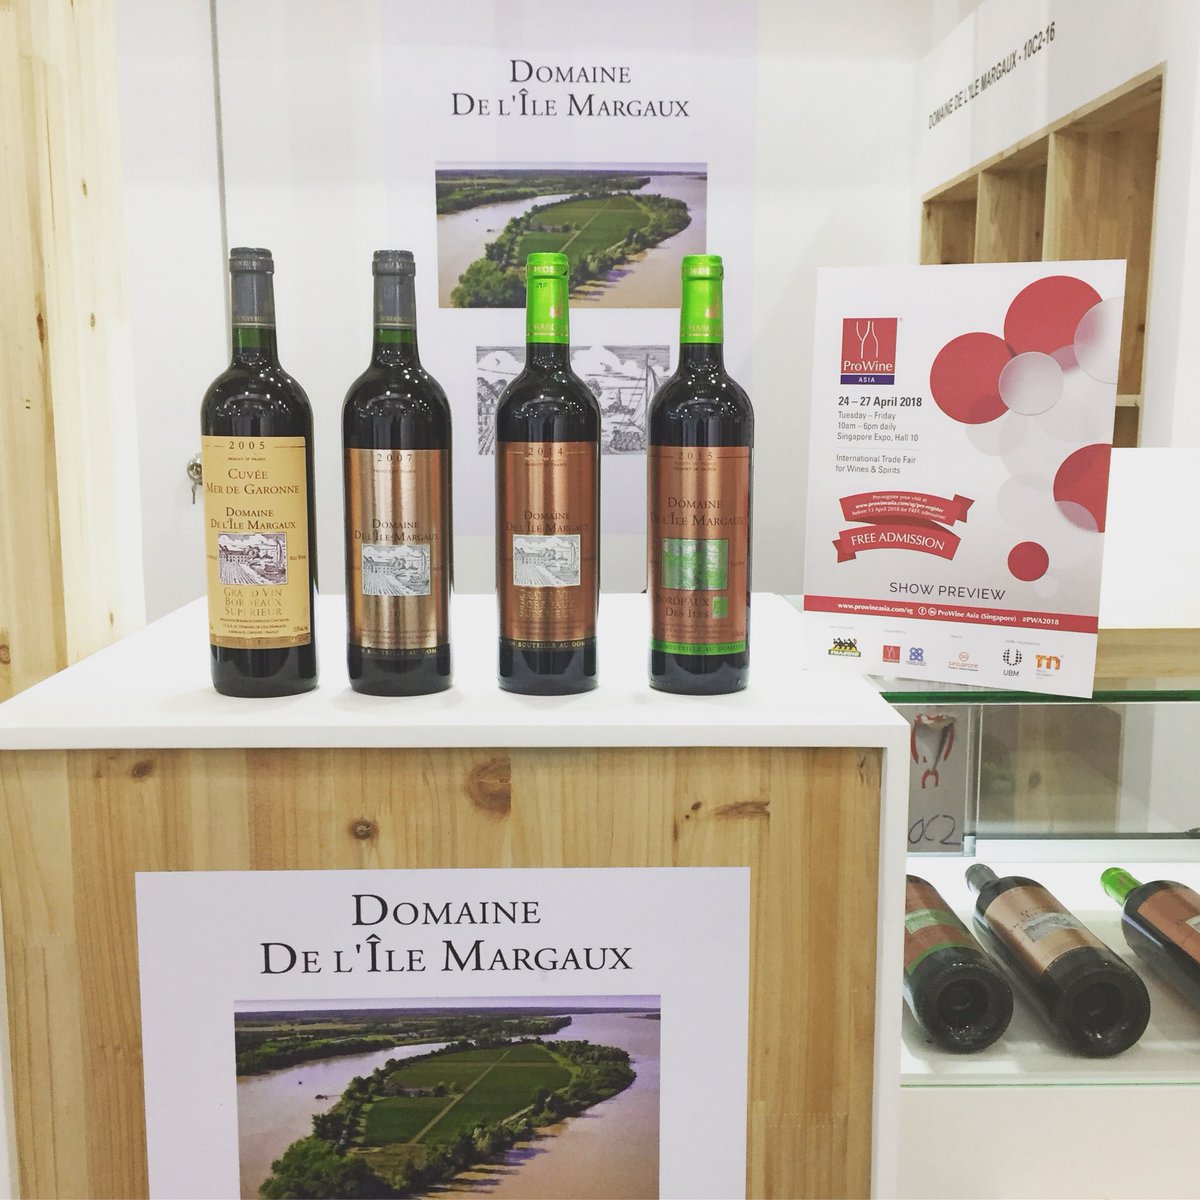 If you are in Singapore this week come to taste our wines at ProWine Asia in Singapore Expo from April 24th to 27th at our stand Hall 10 C2 16

#singapore #prowine #asia #sofrance #businessfrance #frenchwines #singaporeexpo #winetasting #vinsfrancais #domainedelilemargaux